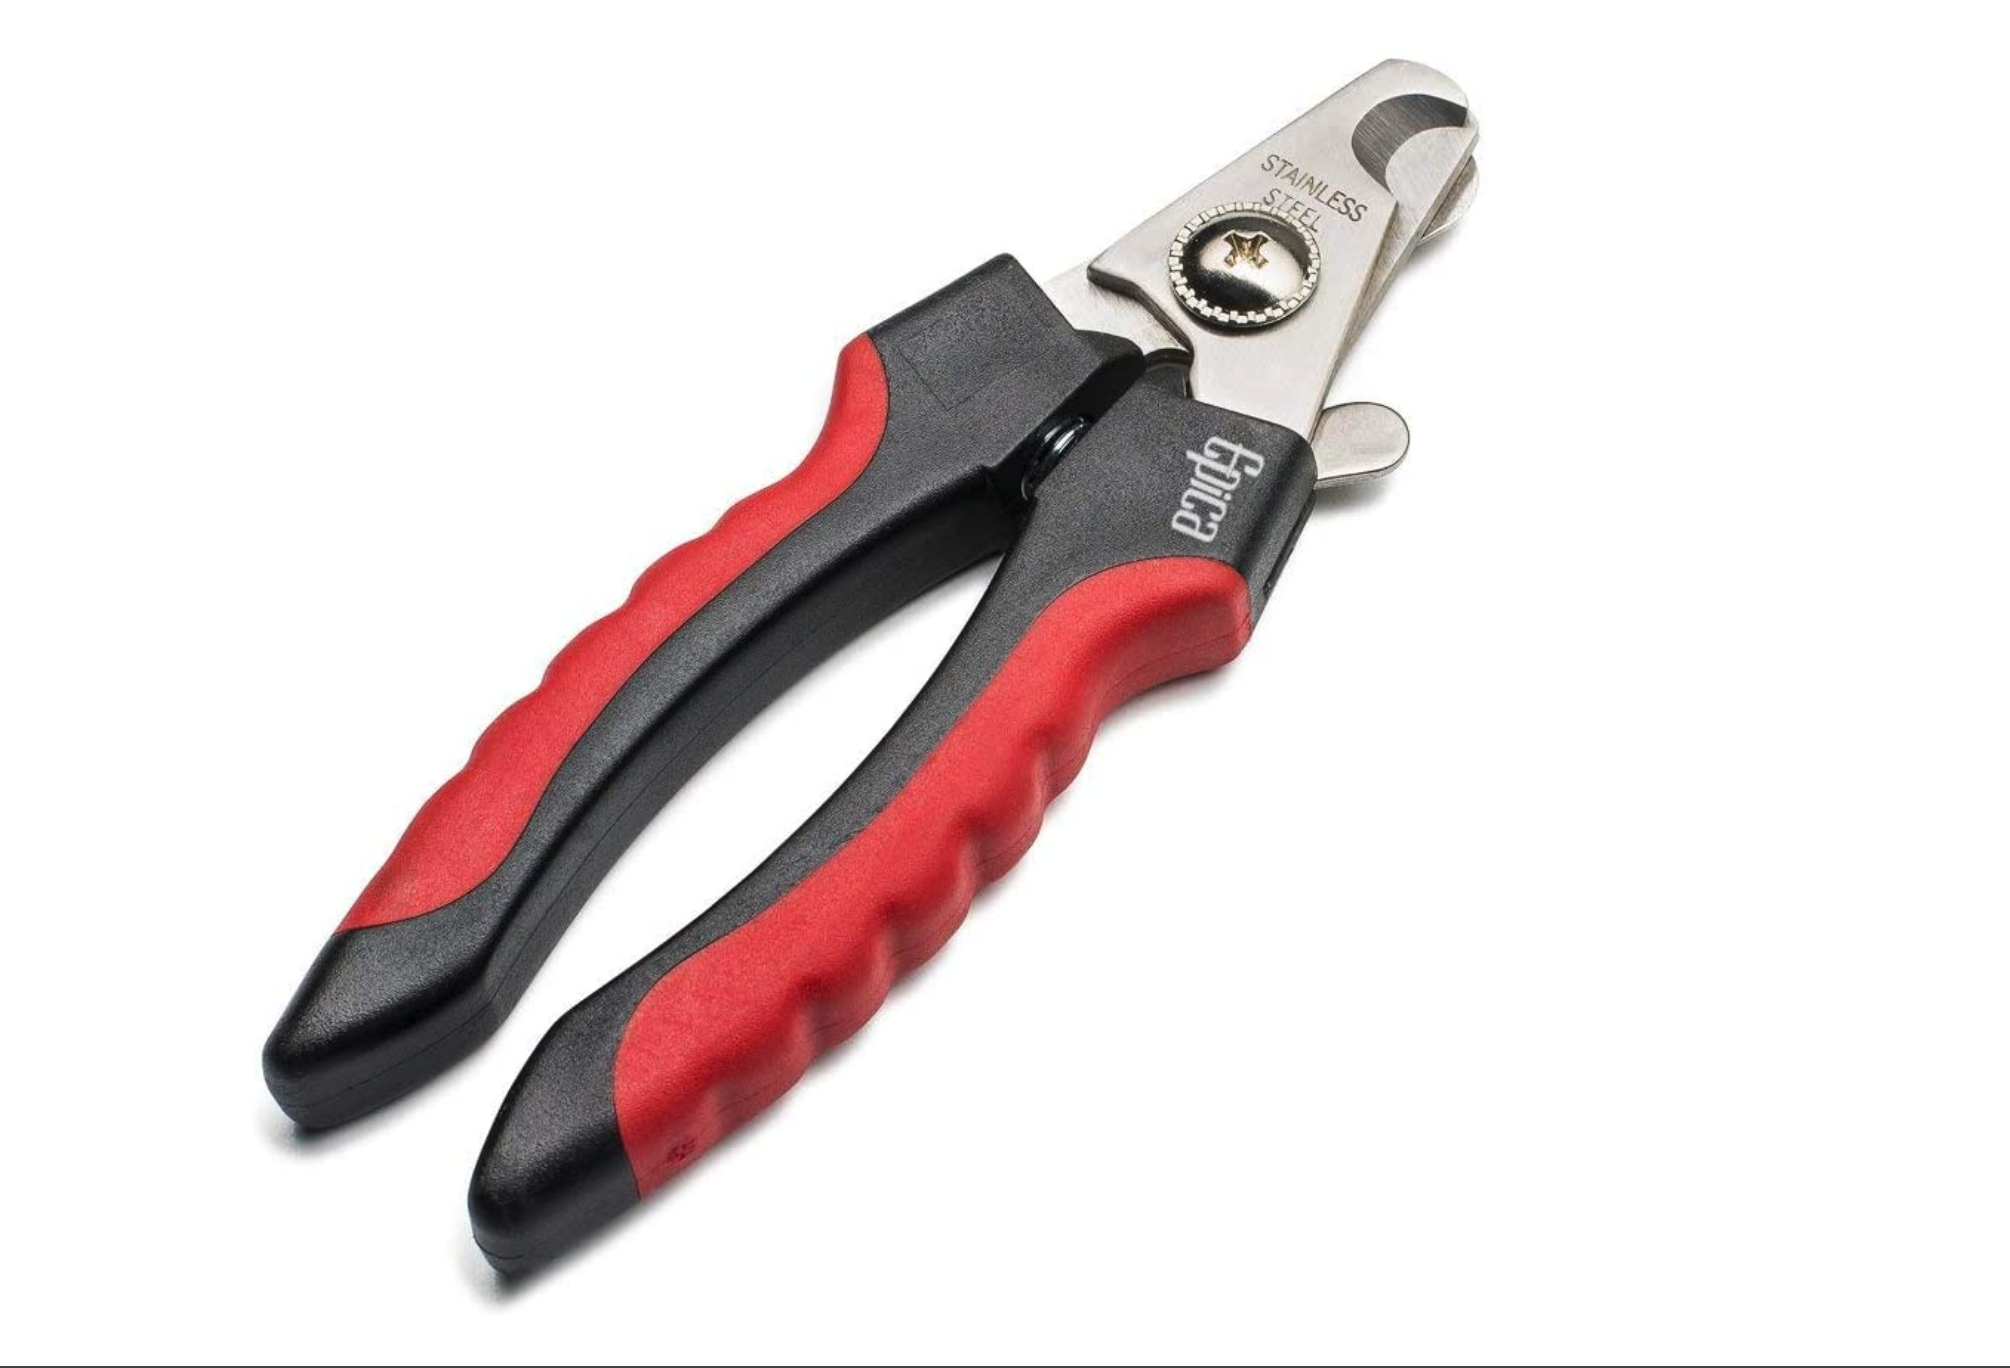 best large dog nail clippers